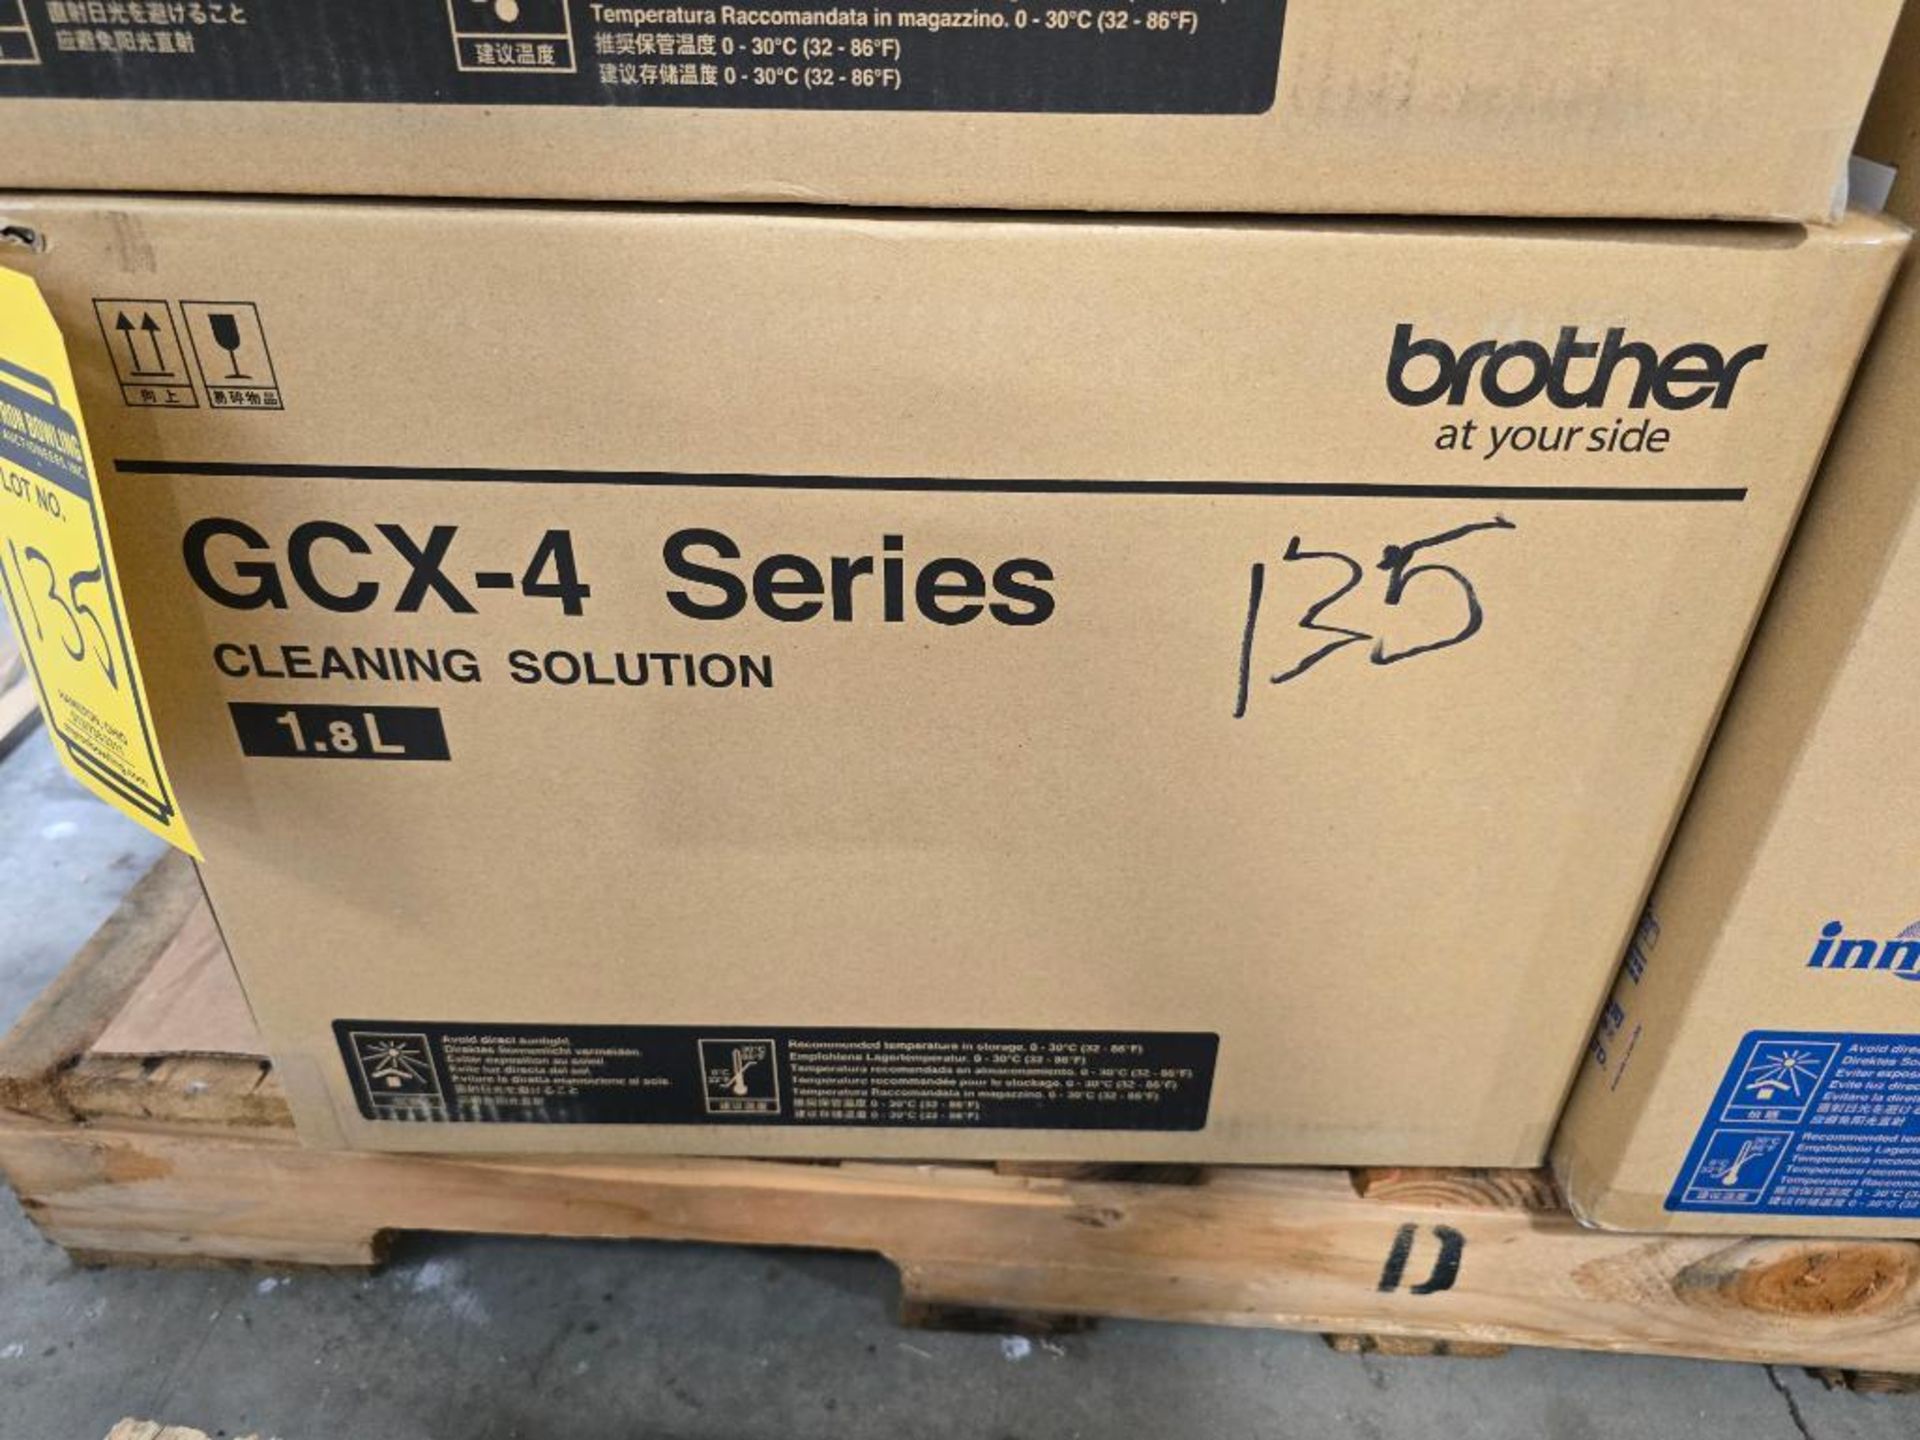 Brother GCX-4 Series Cleaning Solution, 1.8 Liter Container - Image 2 of 3